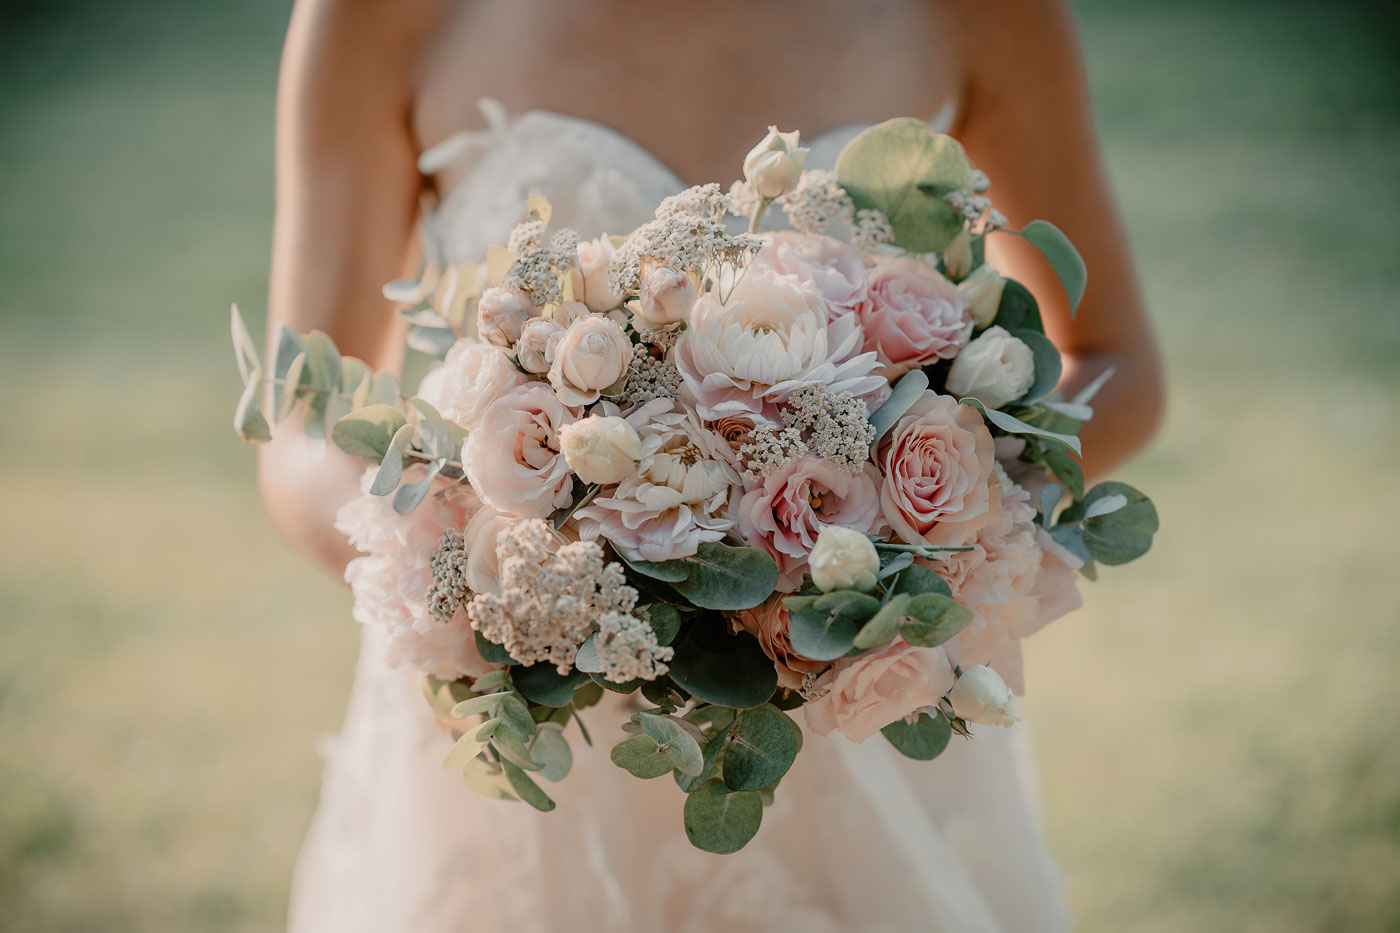 spring bride bouquet - romantic details - marriage in italy - Dream on wedding planner in Umbria